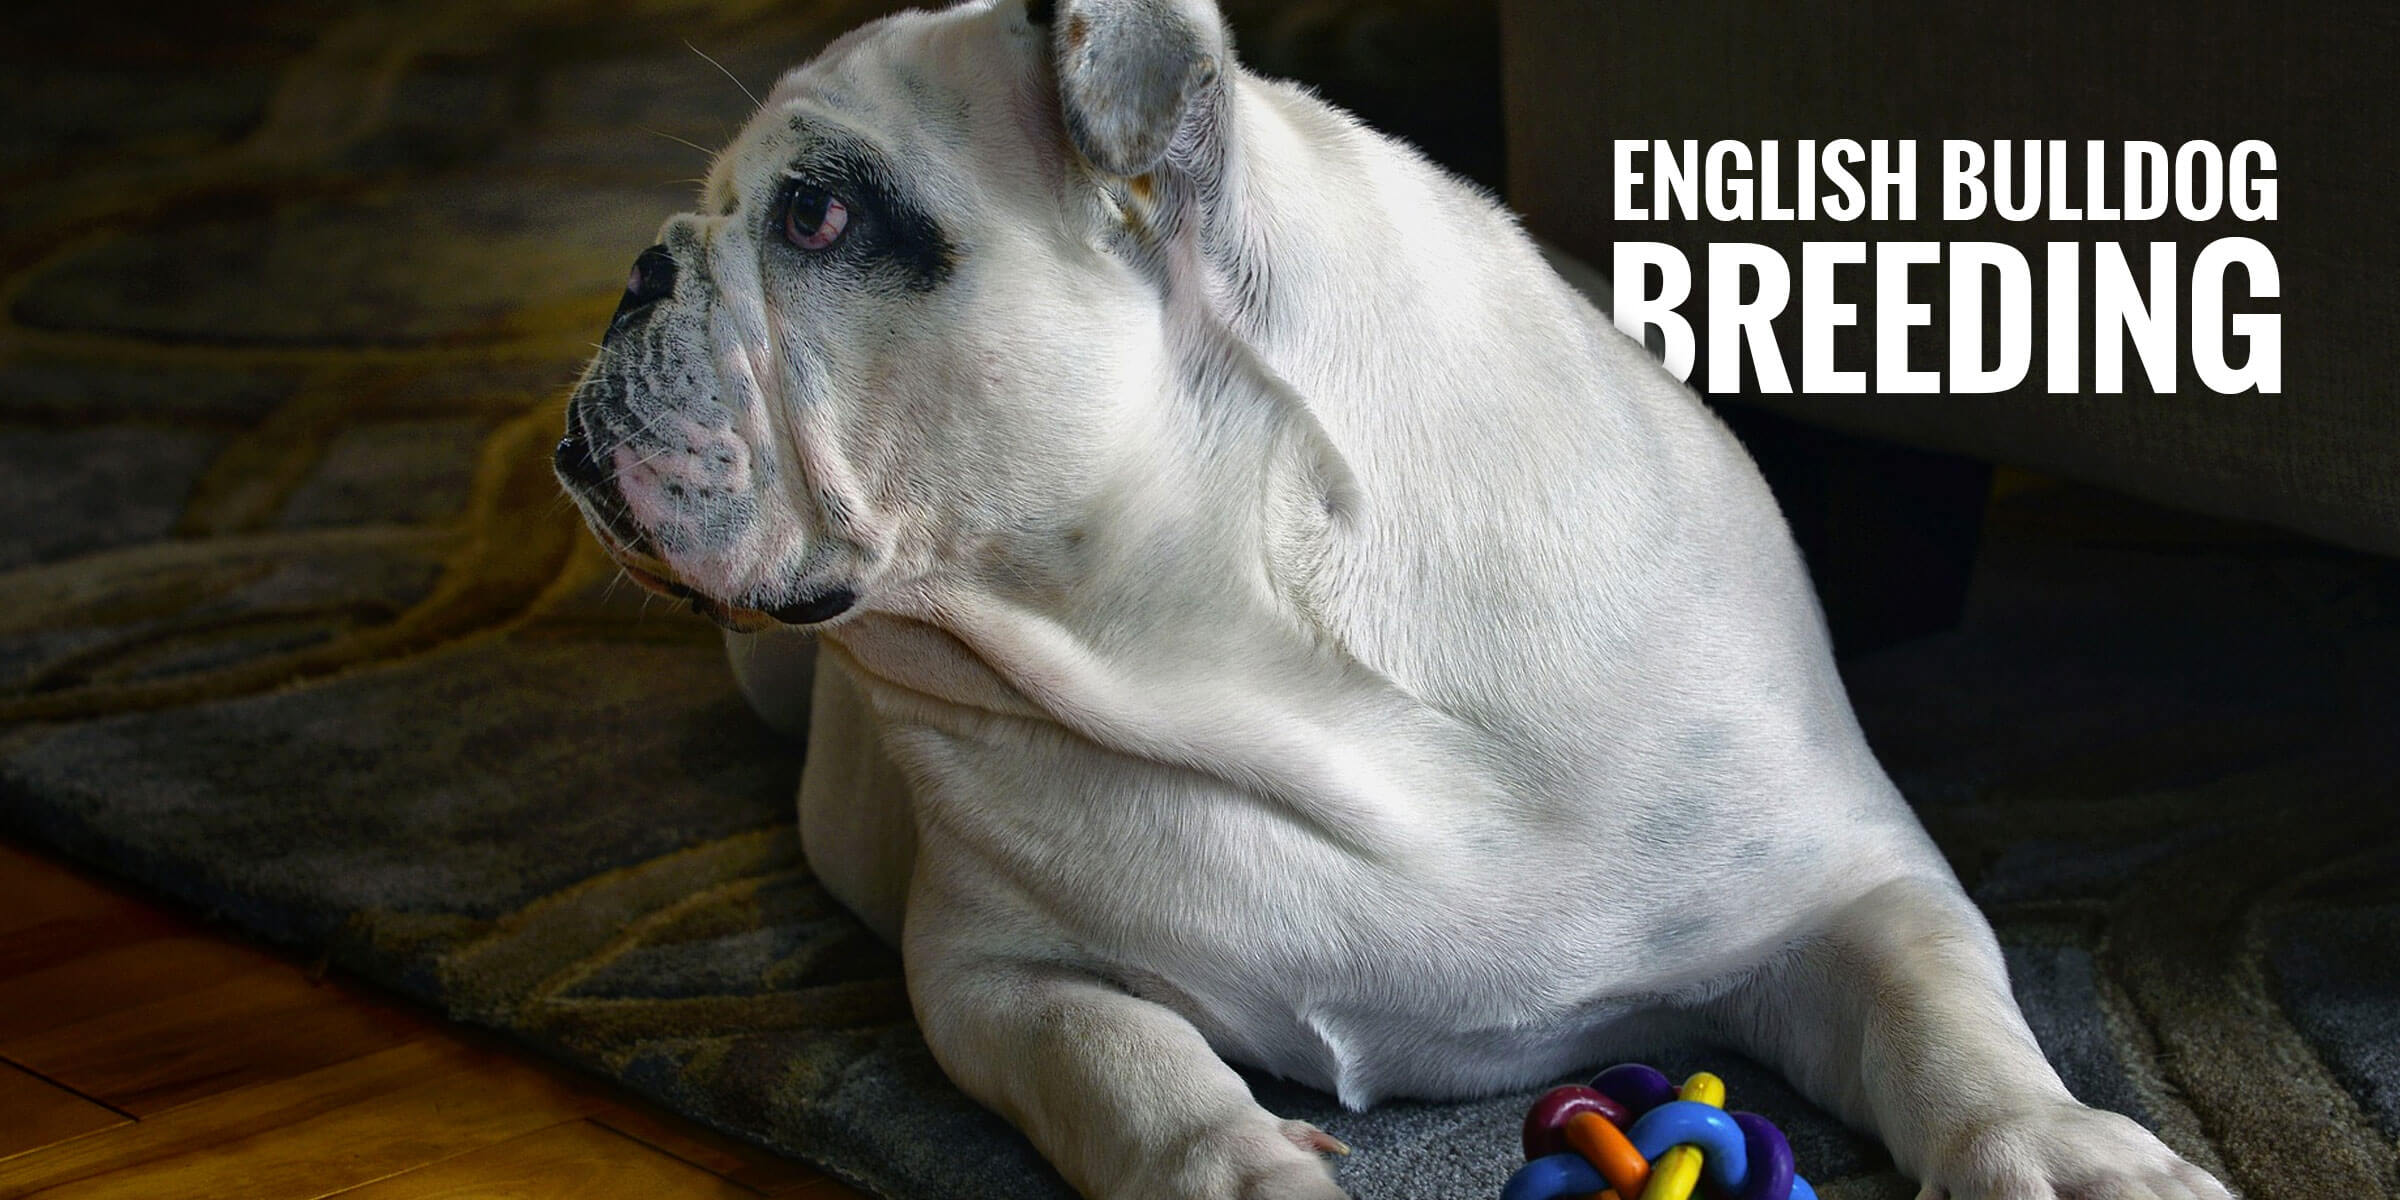 Breeding English Bulldogs — History, Health and Best Practices